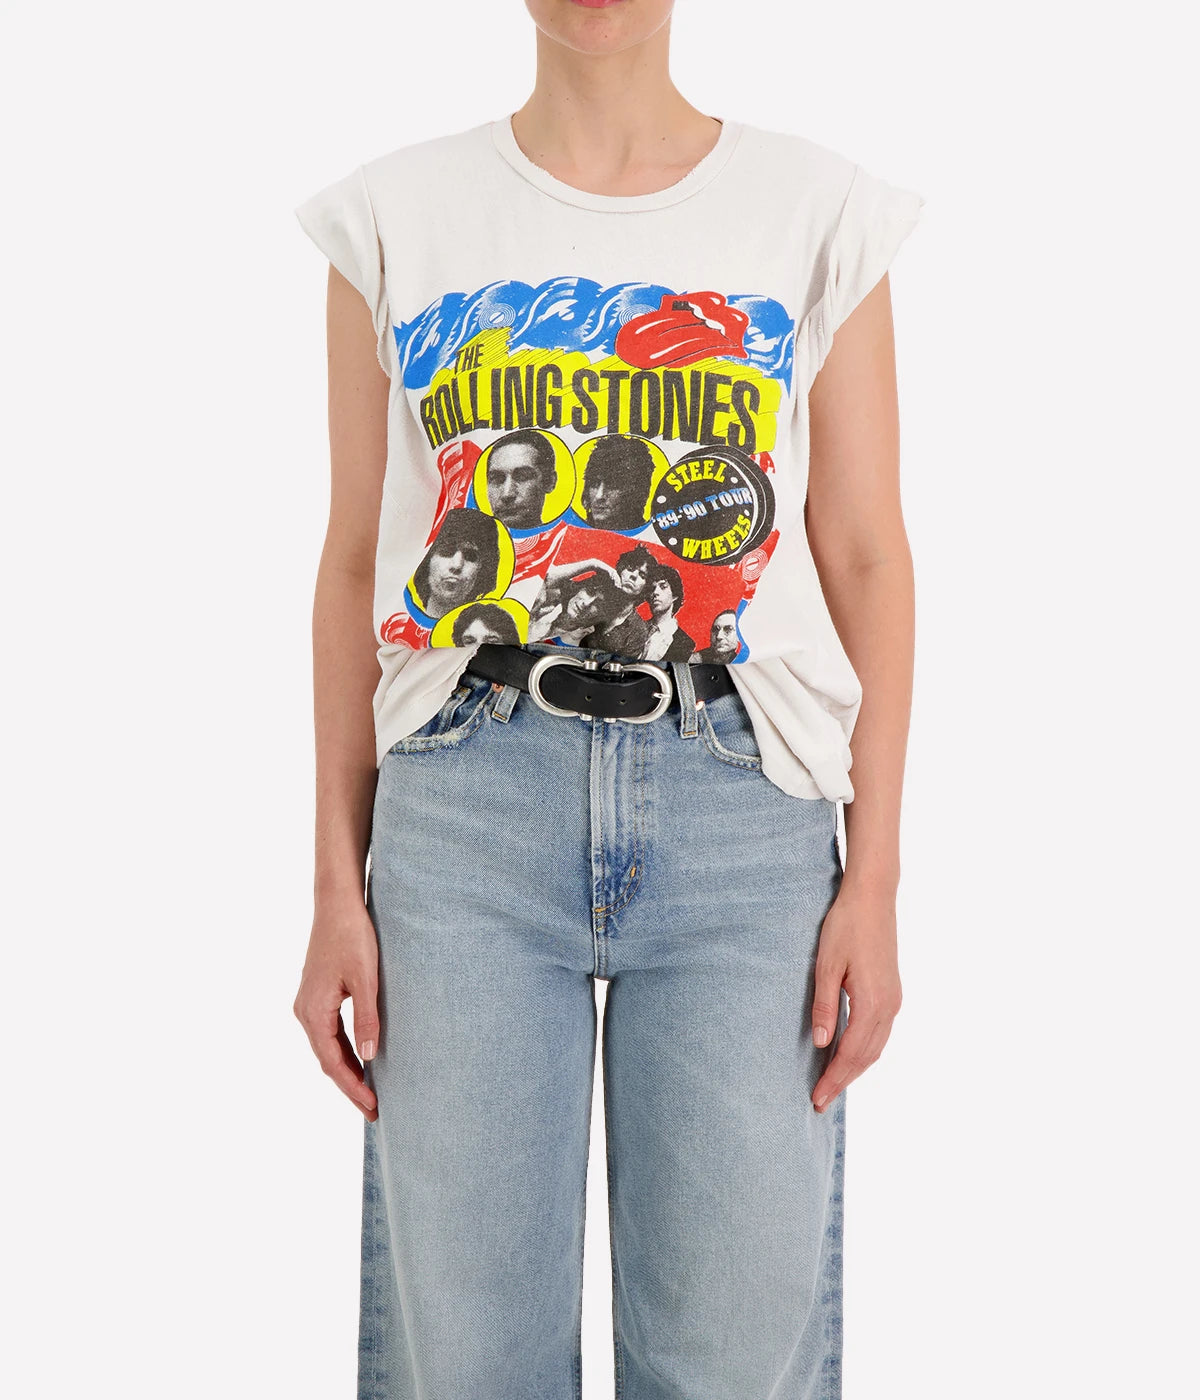 Rolling Stones 1989 T-Shirt in Vintage White